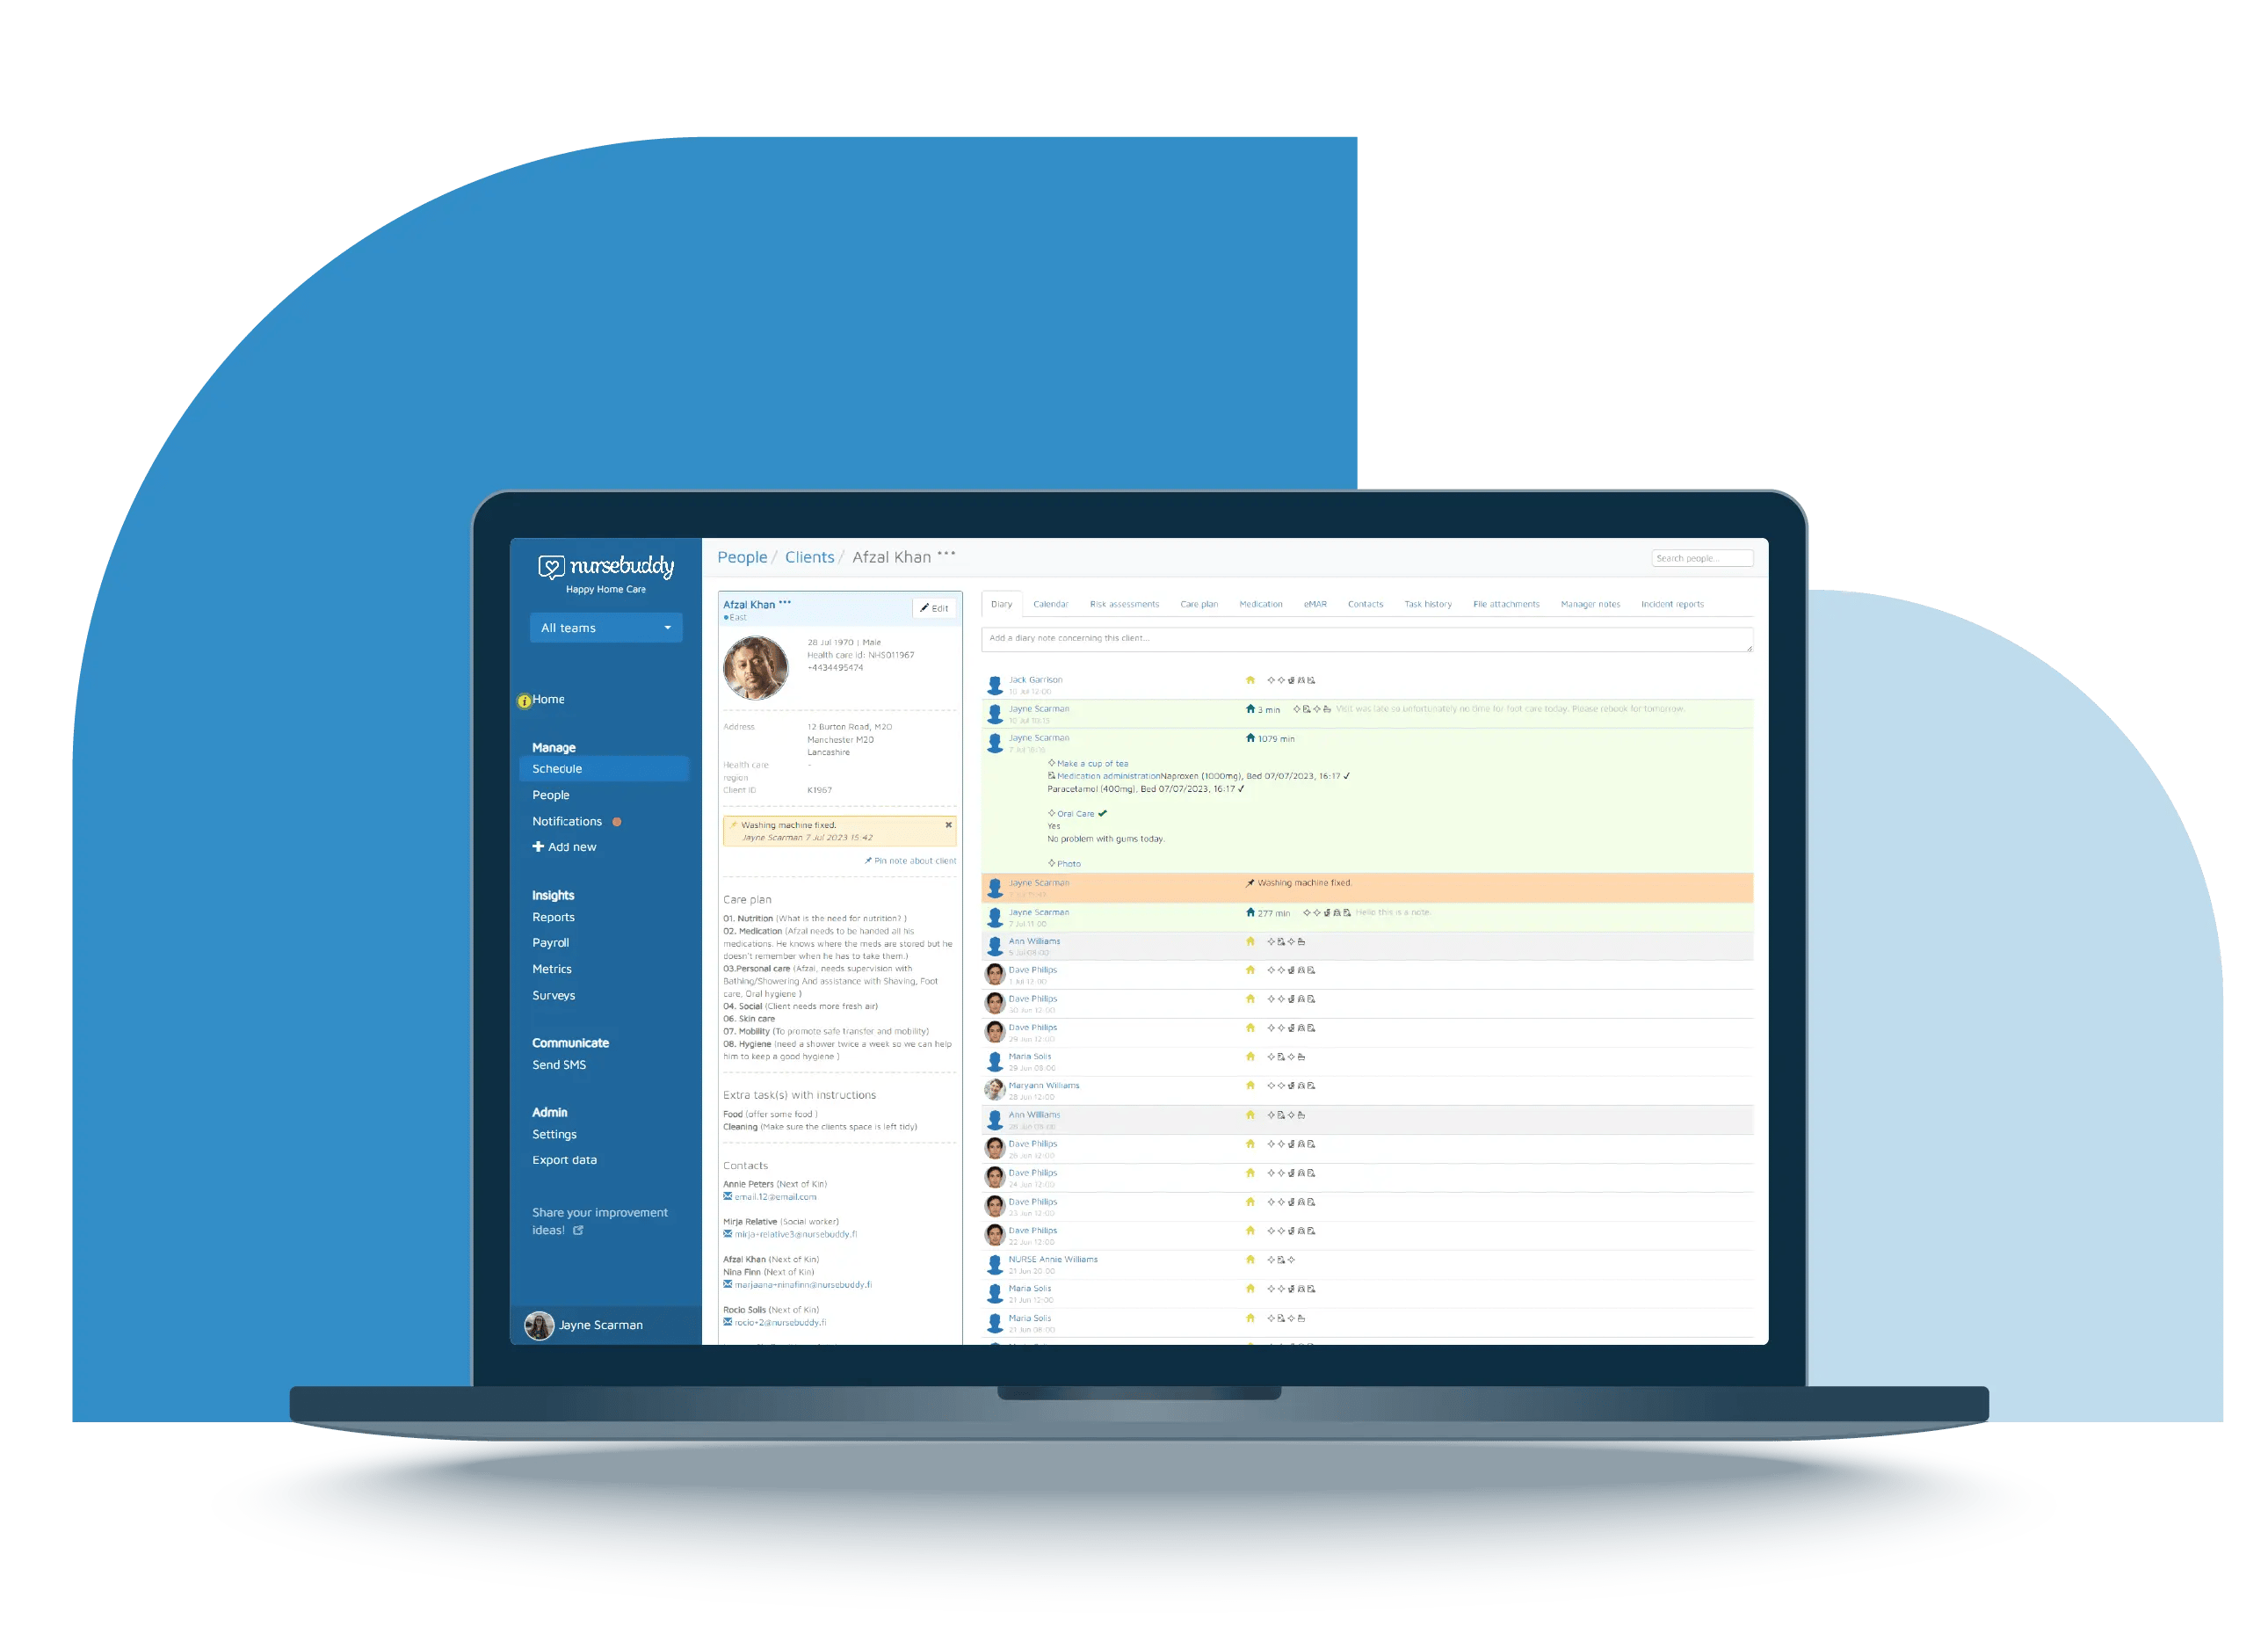 A client diary overview on the Nursebuddy's Family Portal